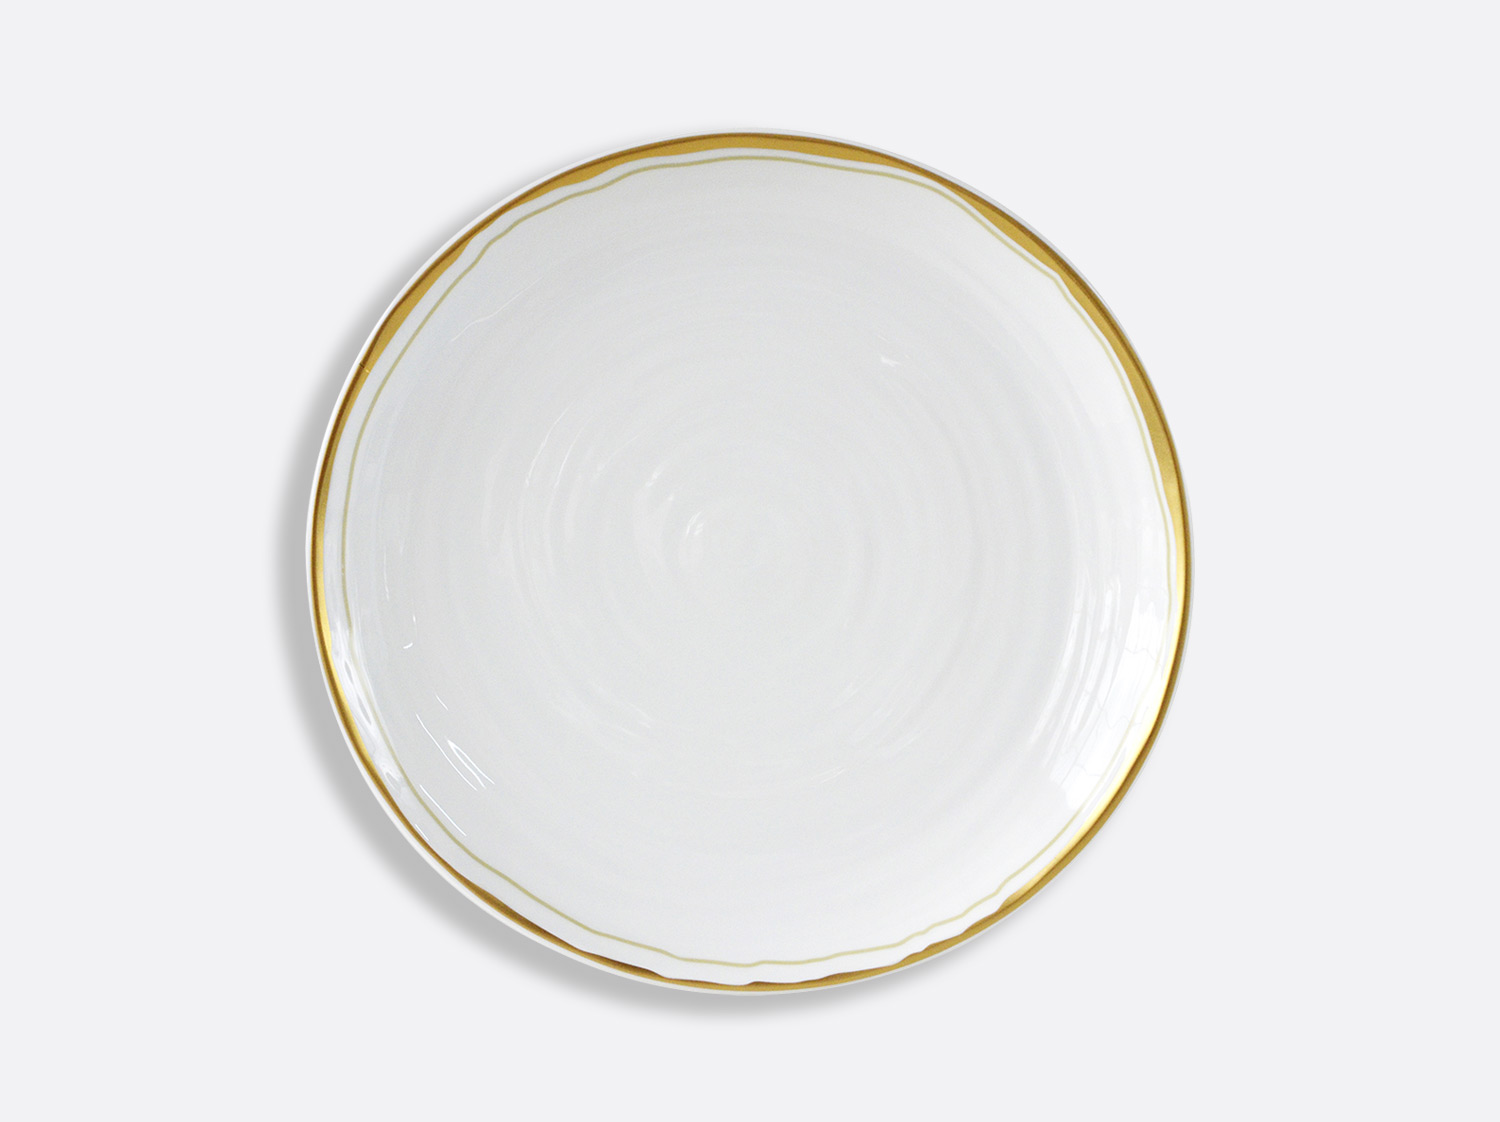 China Coupe plate 10.6" of the collection ALBÂTRE | Bernardaud